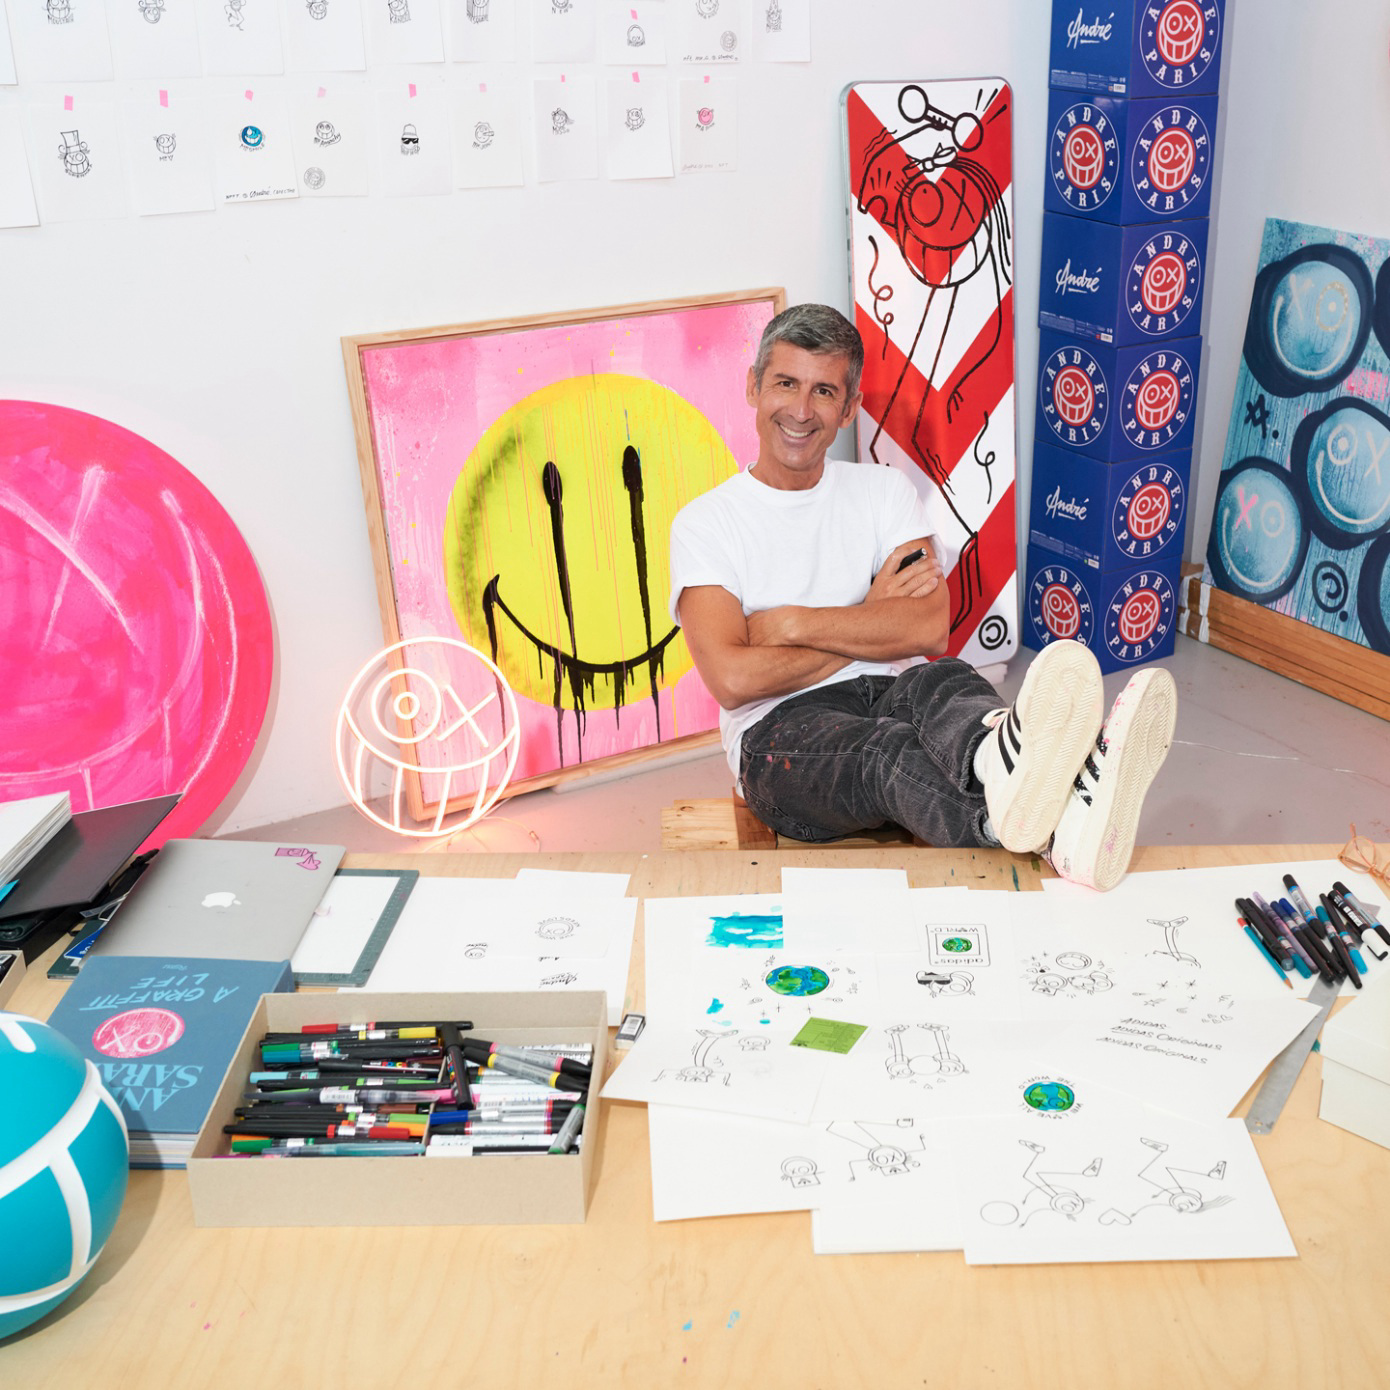 André Saraiva in his studio on the floor surrounded by art.